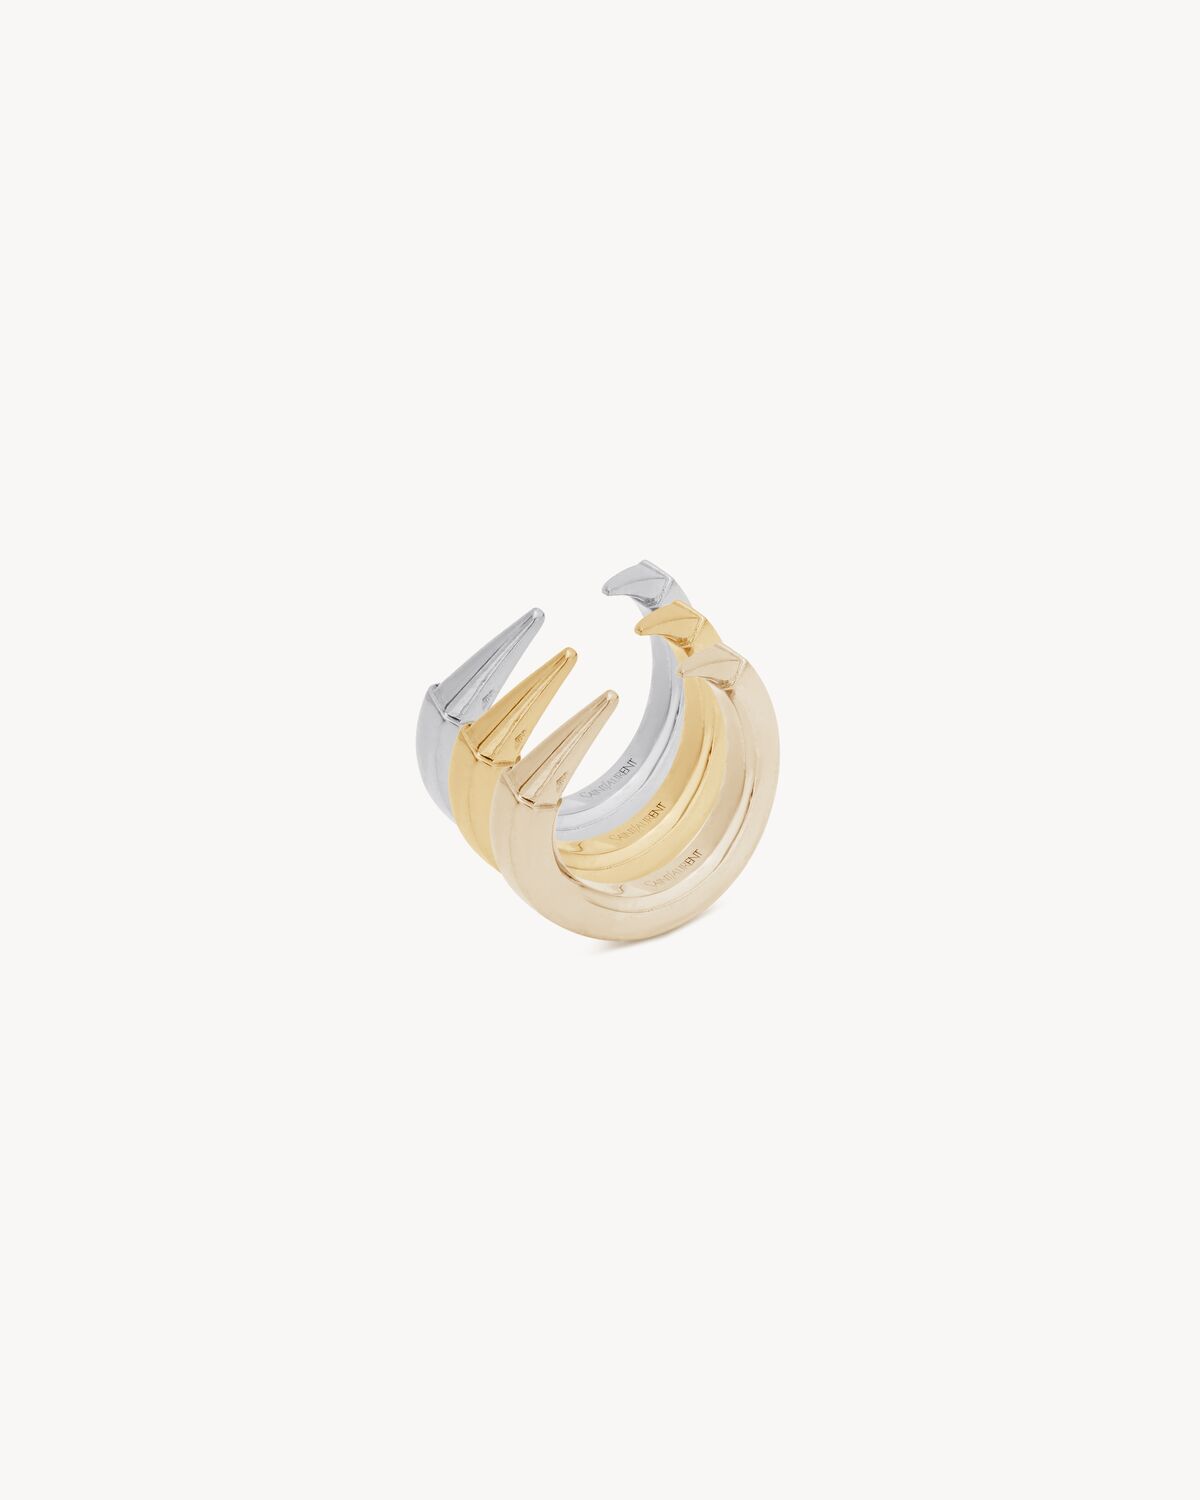 Spiky rings in 18K grey gold, yellow, gold and pale gold